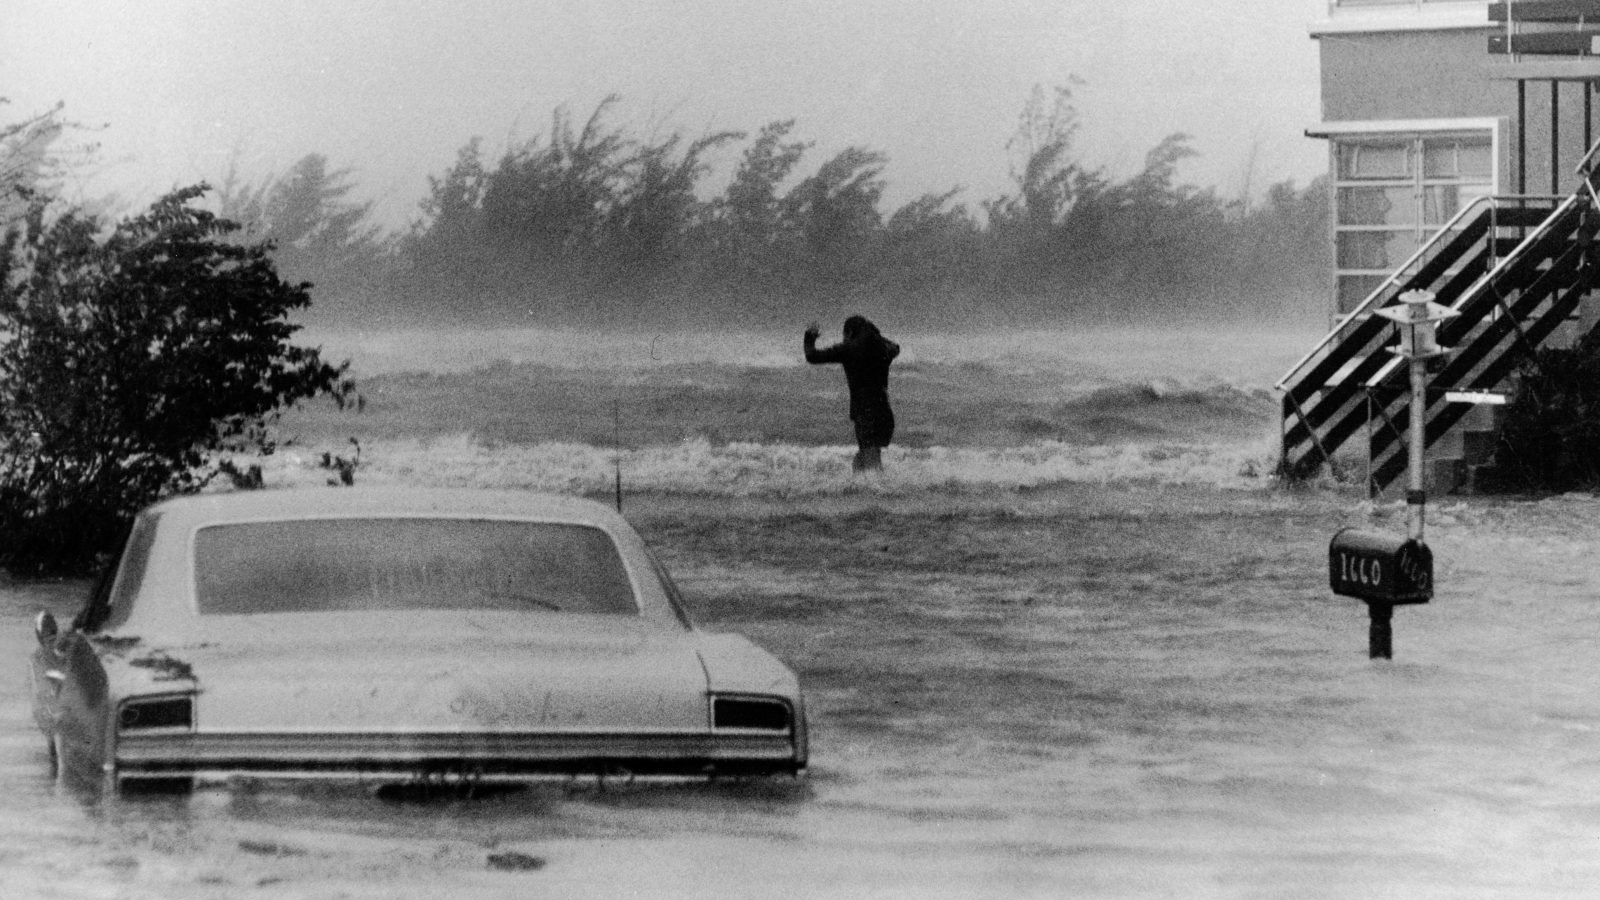 A black and white photo shows a submerged car and windblown trees as a distant figure braces against the wind.